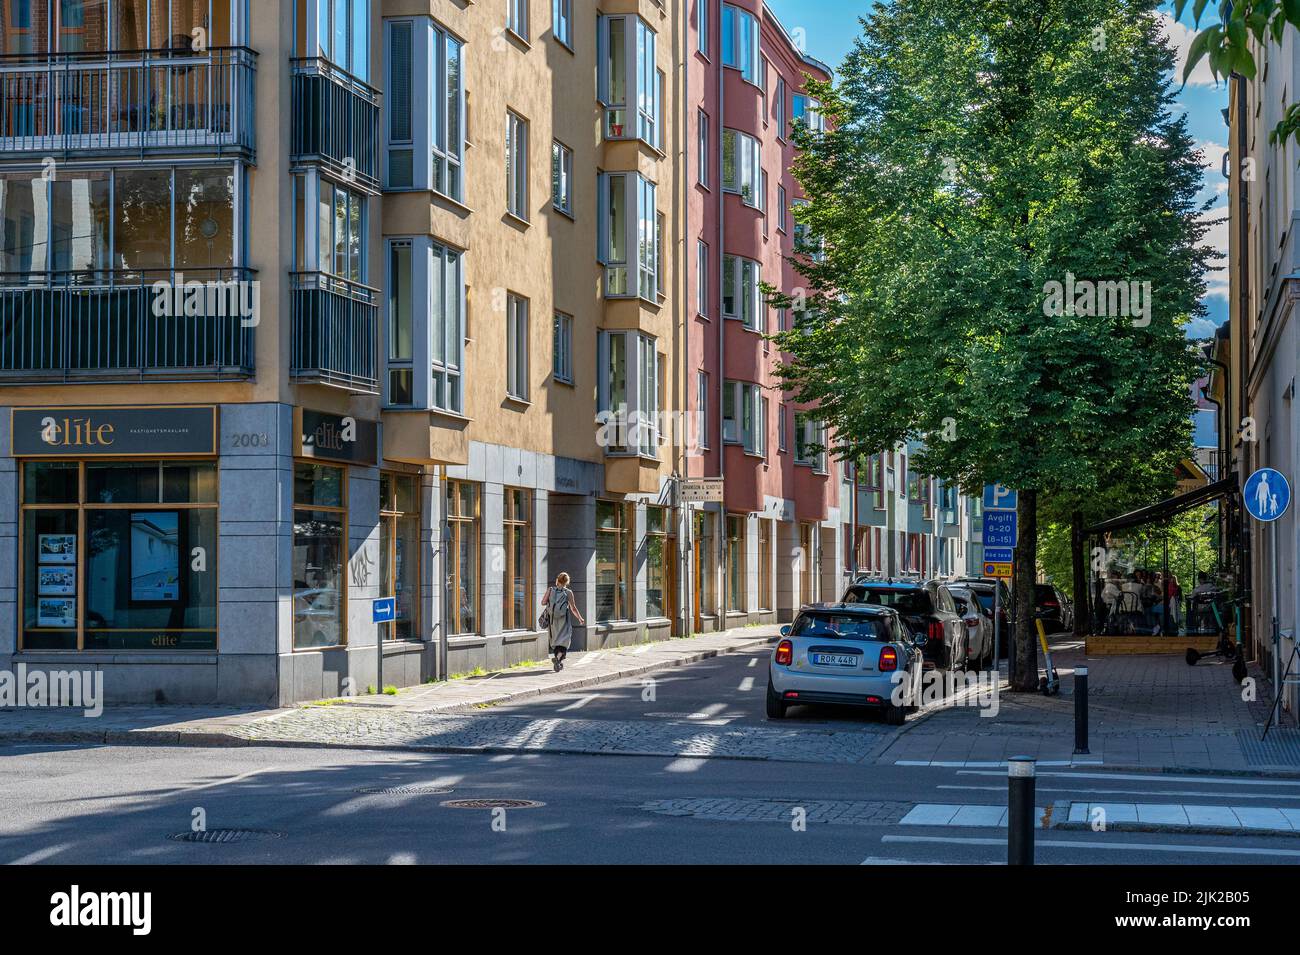 Residential street Prastgatan in the centre of Norrkoping during summer. Norrkoping is a historic industrial town in Sweden. Stock Photo